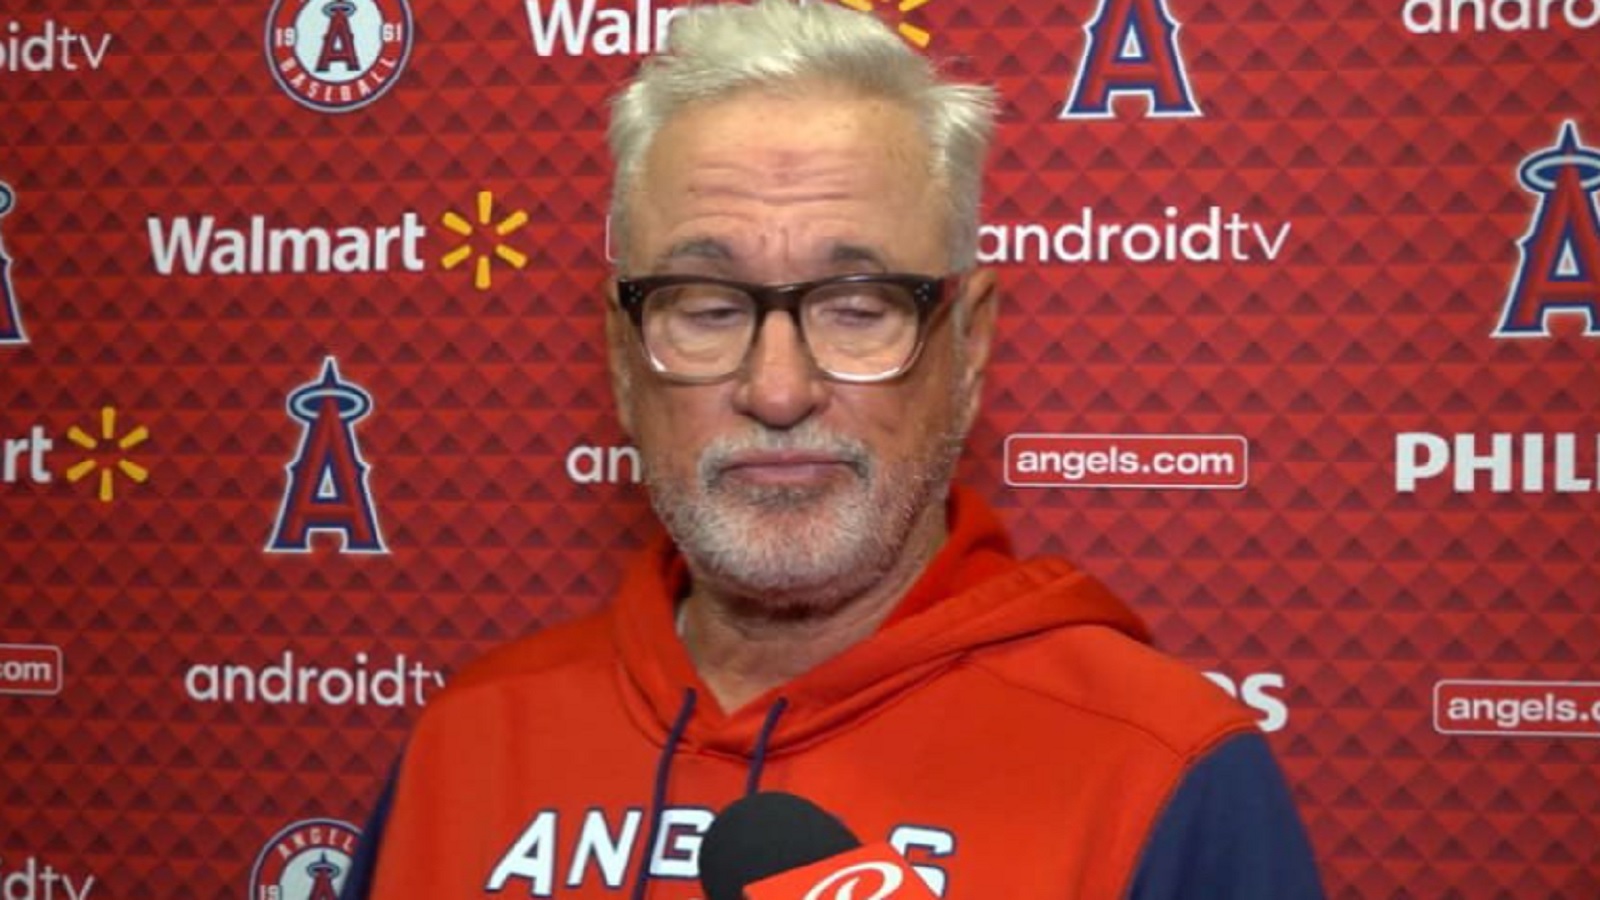 Joe Maddon has brutal quote about Angels after firing